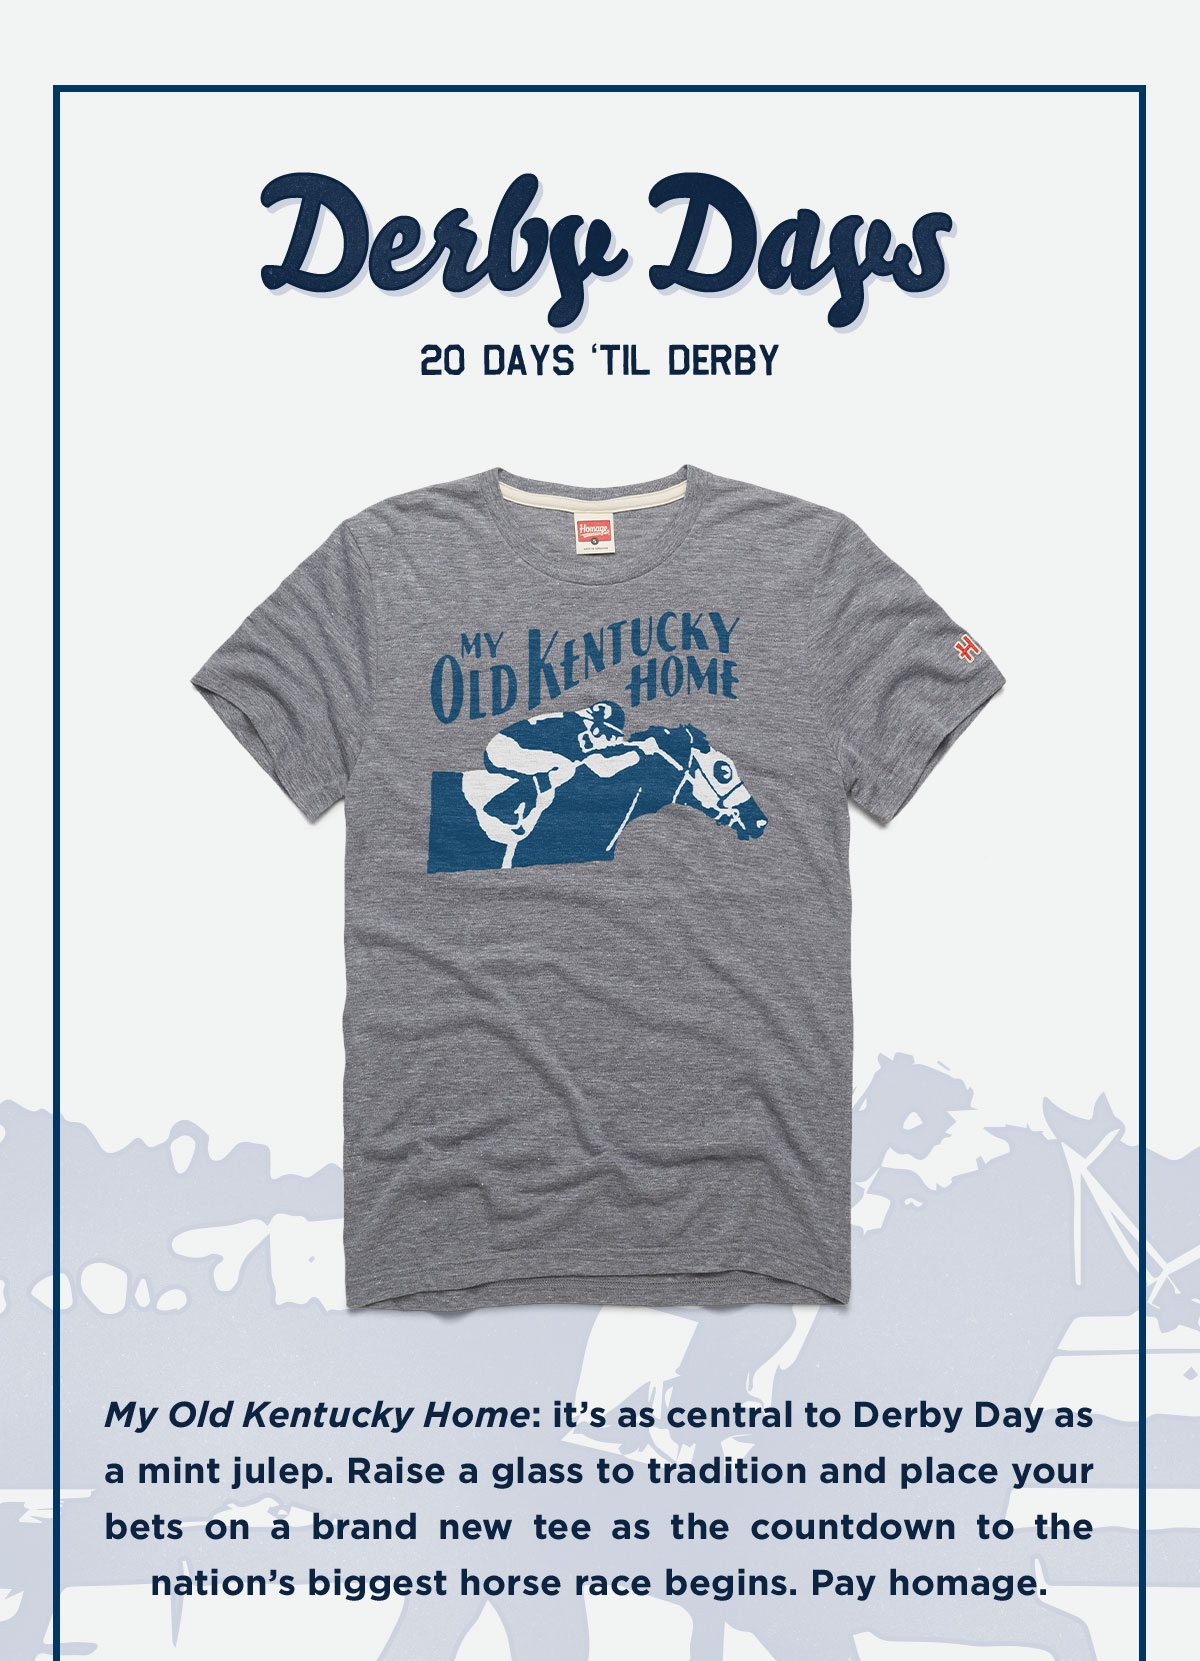 My Old Kentucky Home: it’s as central to Derby Day as a mint julep. Raise a glass to tradition and place your bets on a brand new tee as the countdown to the nation’s biggest horse race begins. Pay homage.